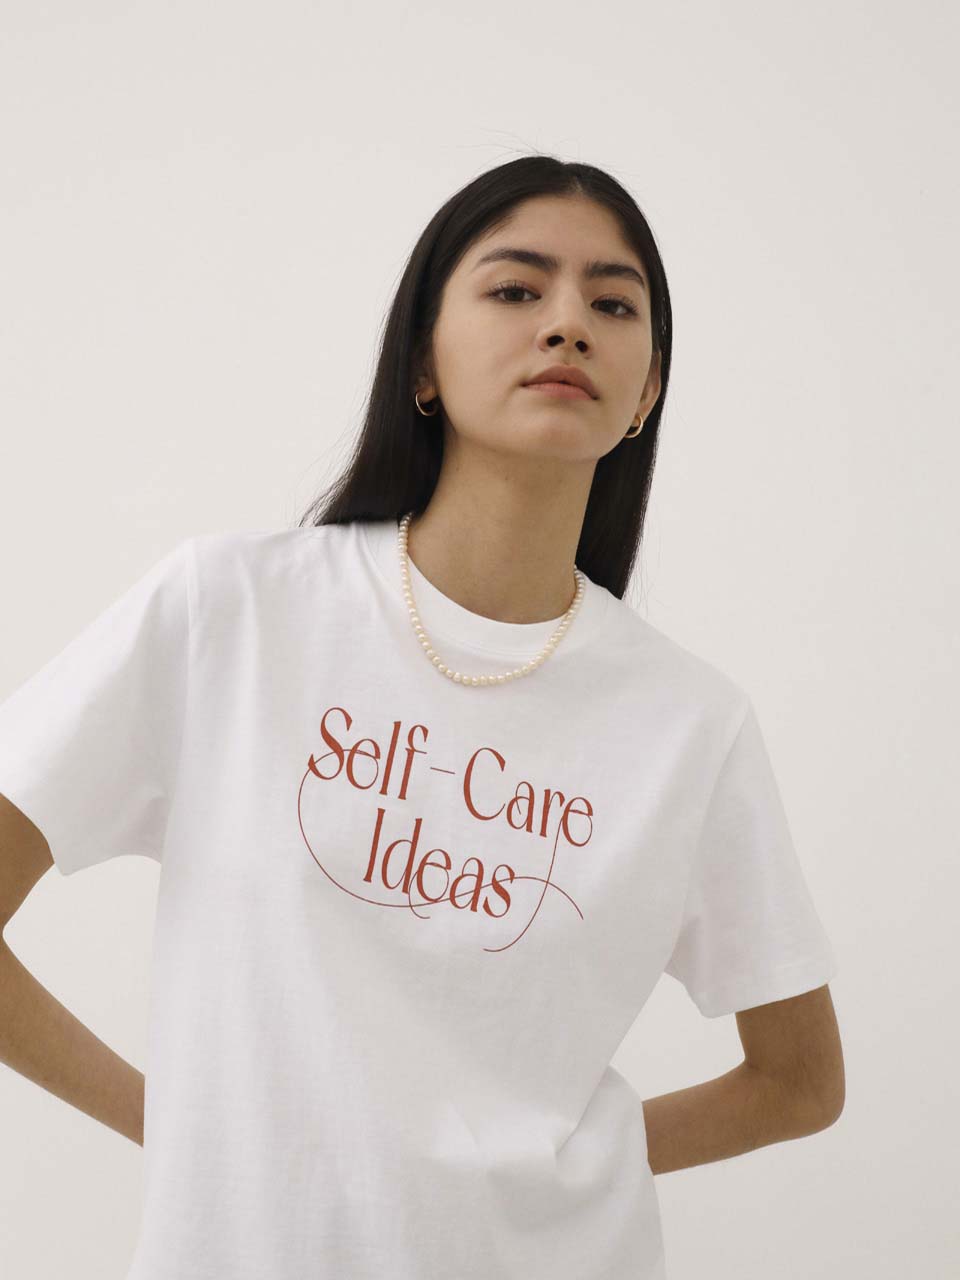 Self-care ideas Short sleeves t-shirts white